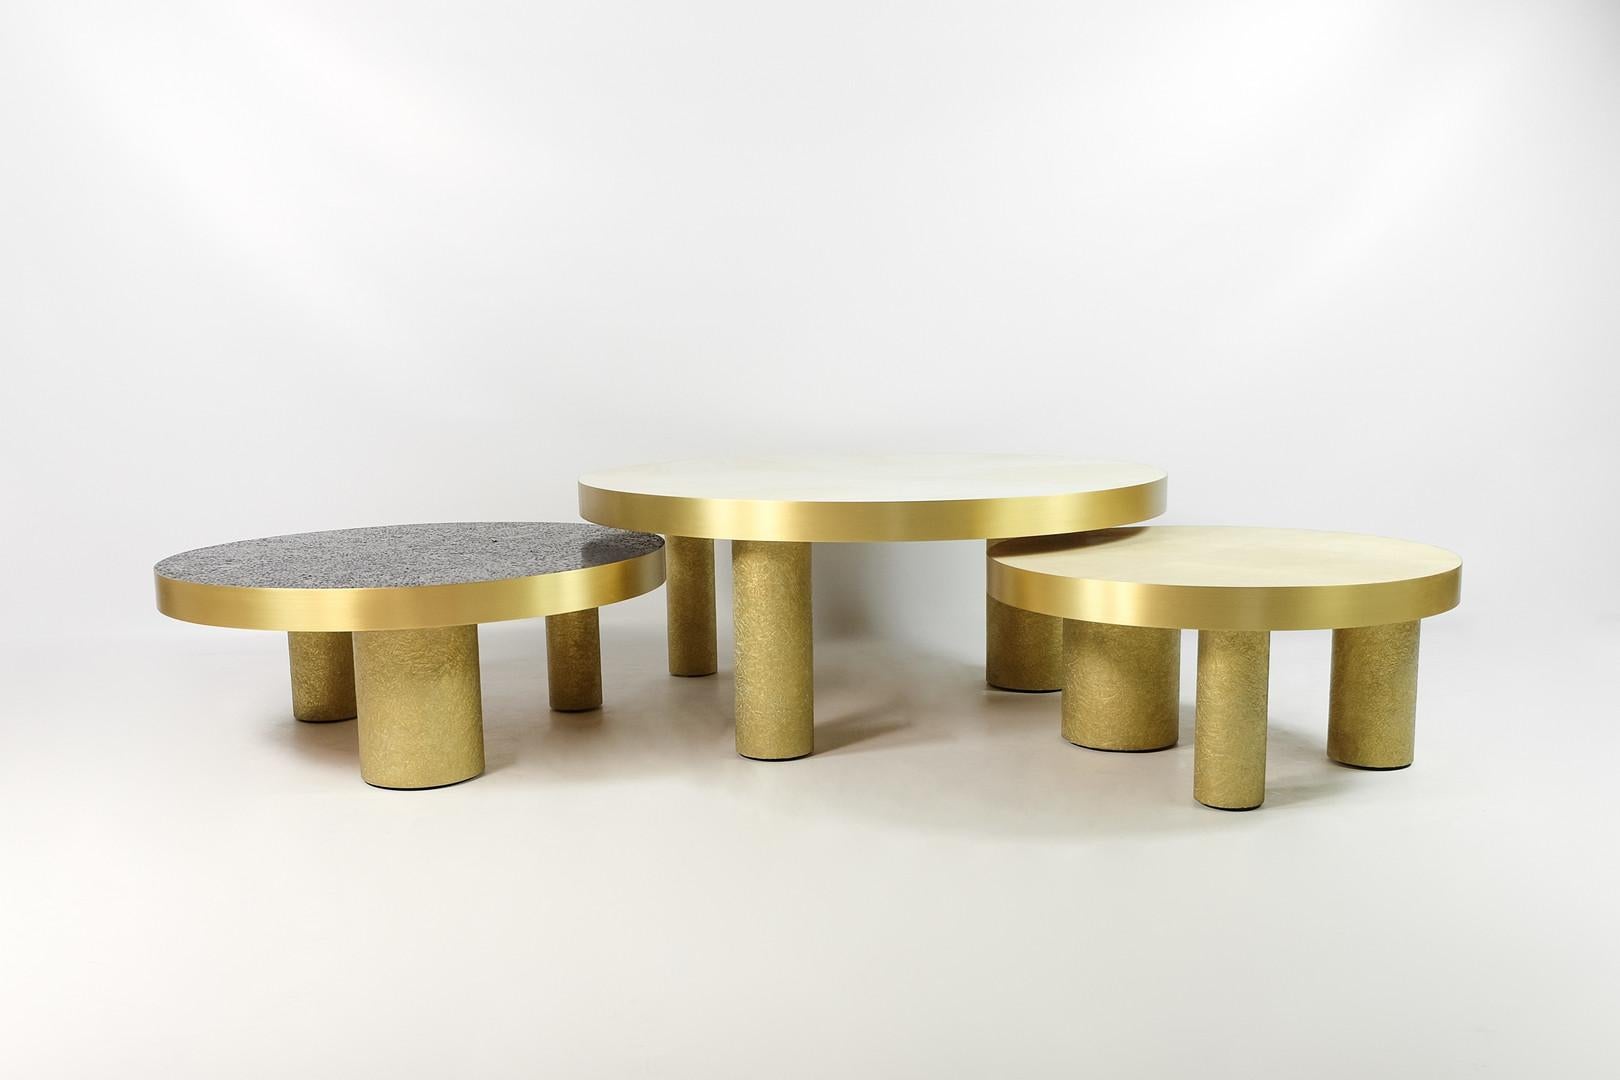 This set of 3 coffee tables is made of various inlaid materials.
These modular tables can be setted up following your wishes.
The center piece is covered with a polished white rock crystal marquetry, the side tables are inlaid with natural